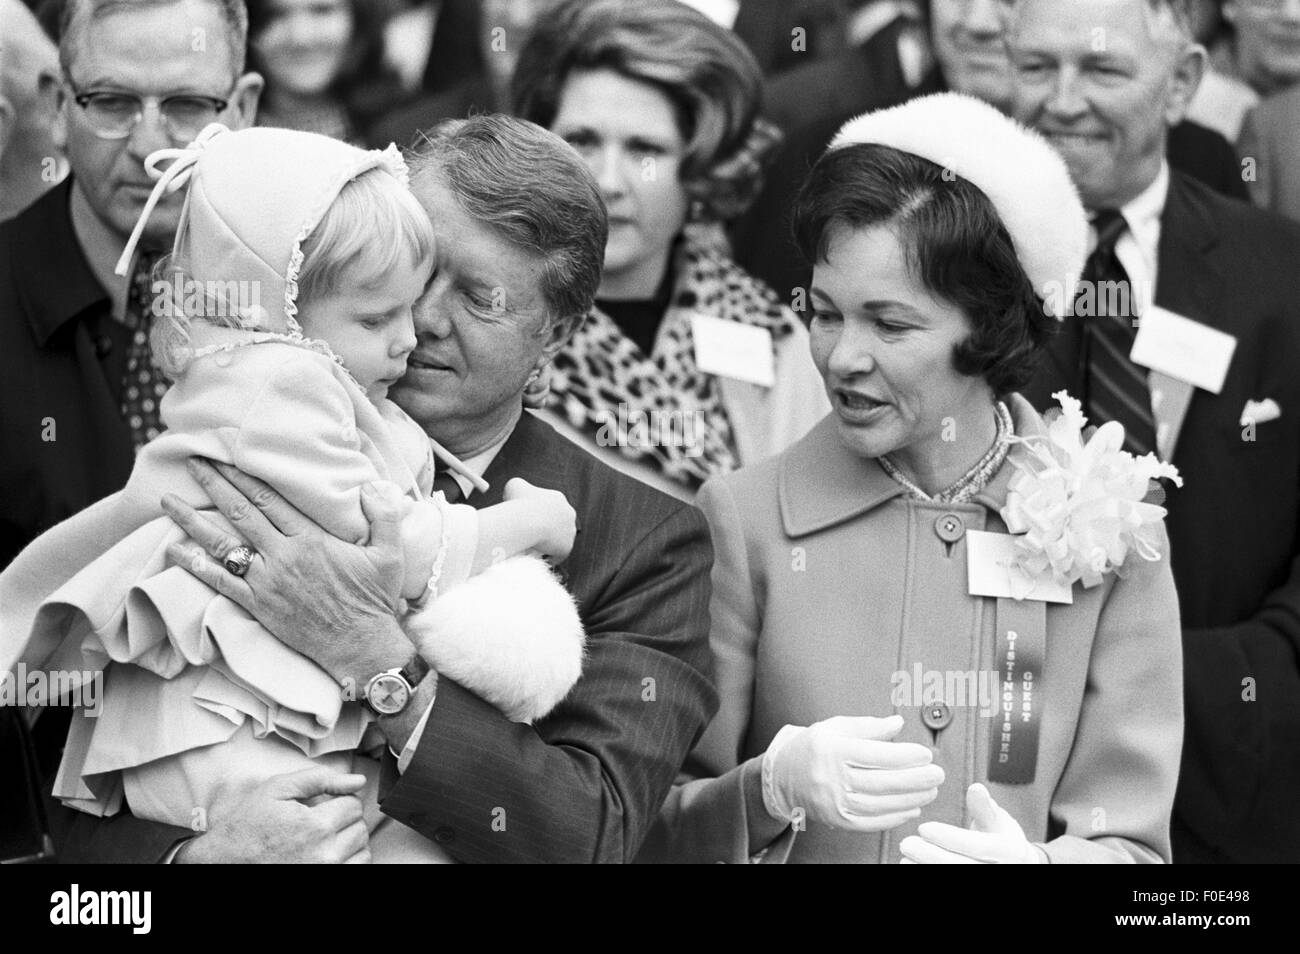 Georgia state senator and governor elect Jimmy Carter at his 1971 gubernatorial inauguration. Carter succeeded segregationist Lester Maddox as Georgia governor. Carter is seated with his wife Rosalyn and daughter Amy. 1st Jan, 2015. © Ken Hawkins/ZUMA Wire/Alamy Live News Stock Photo